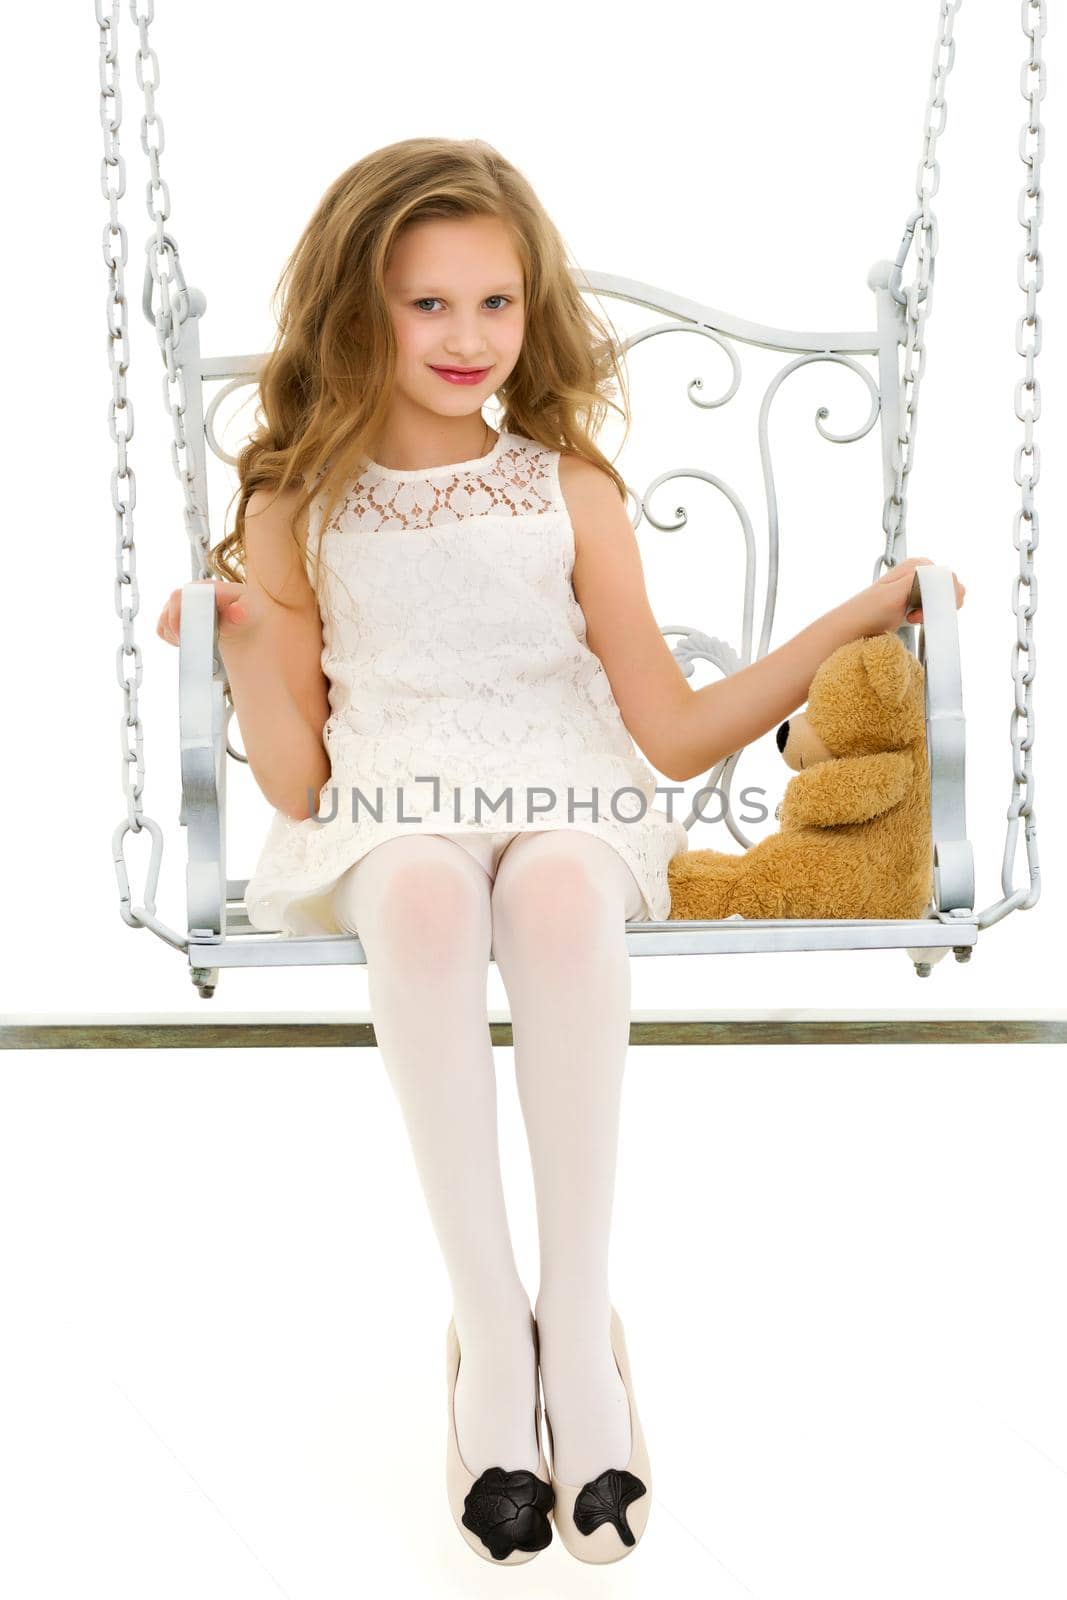 Beautiful Blonde Girl in Elegant White Dress Swinging Her Teddy Bear on Swing, Portrait of Lovely Long Haired Girl Wearing Stylish Clothes Smiling at Camera Against White Background